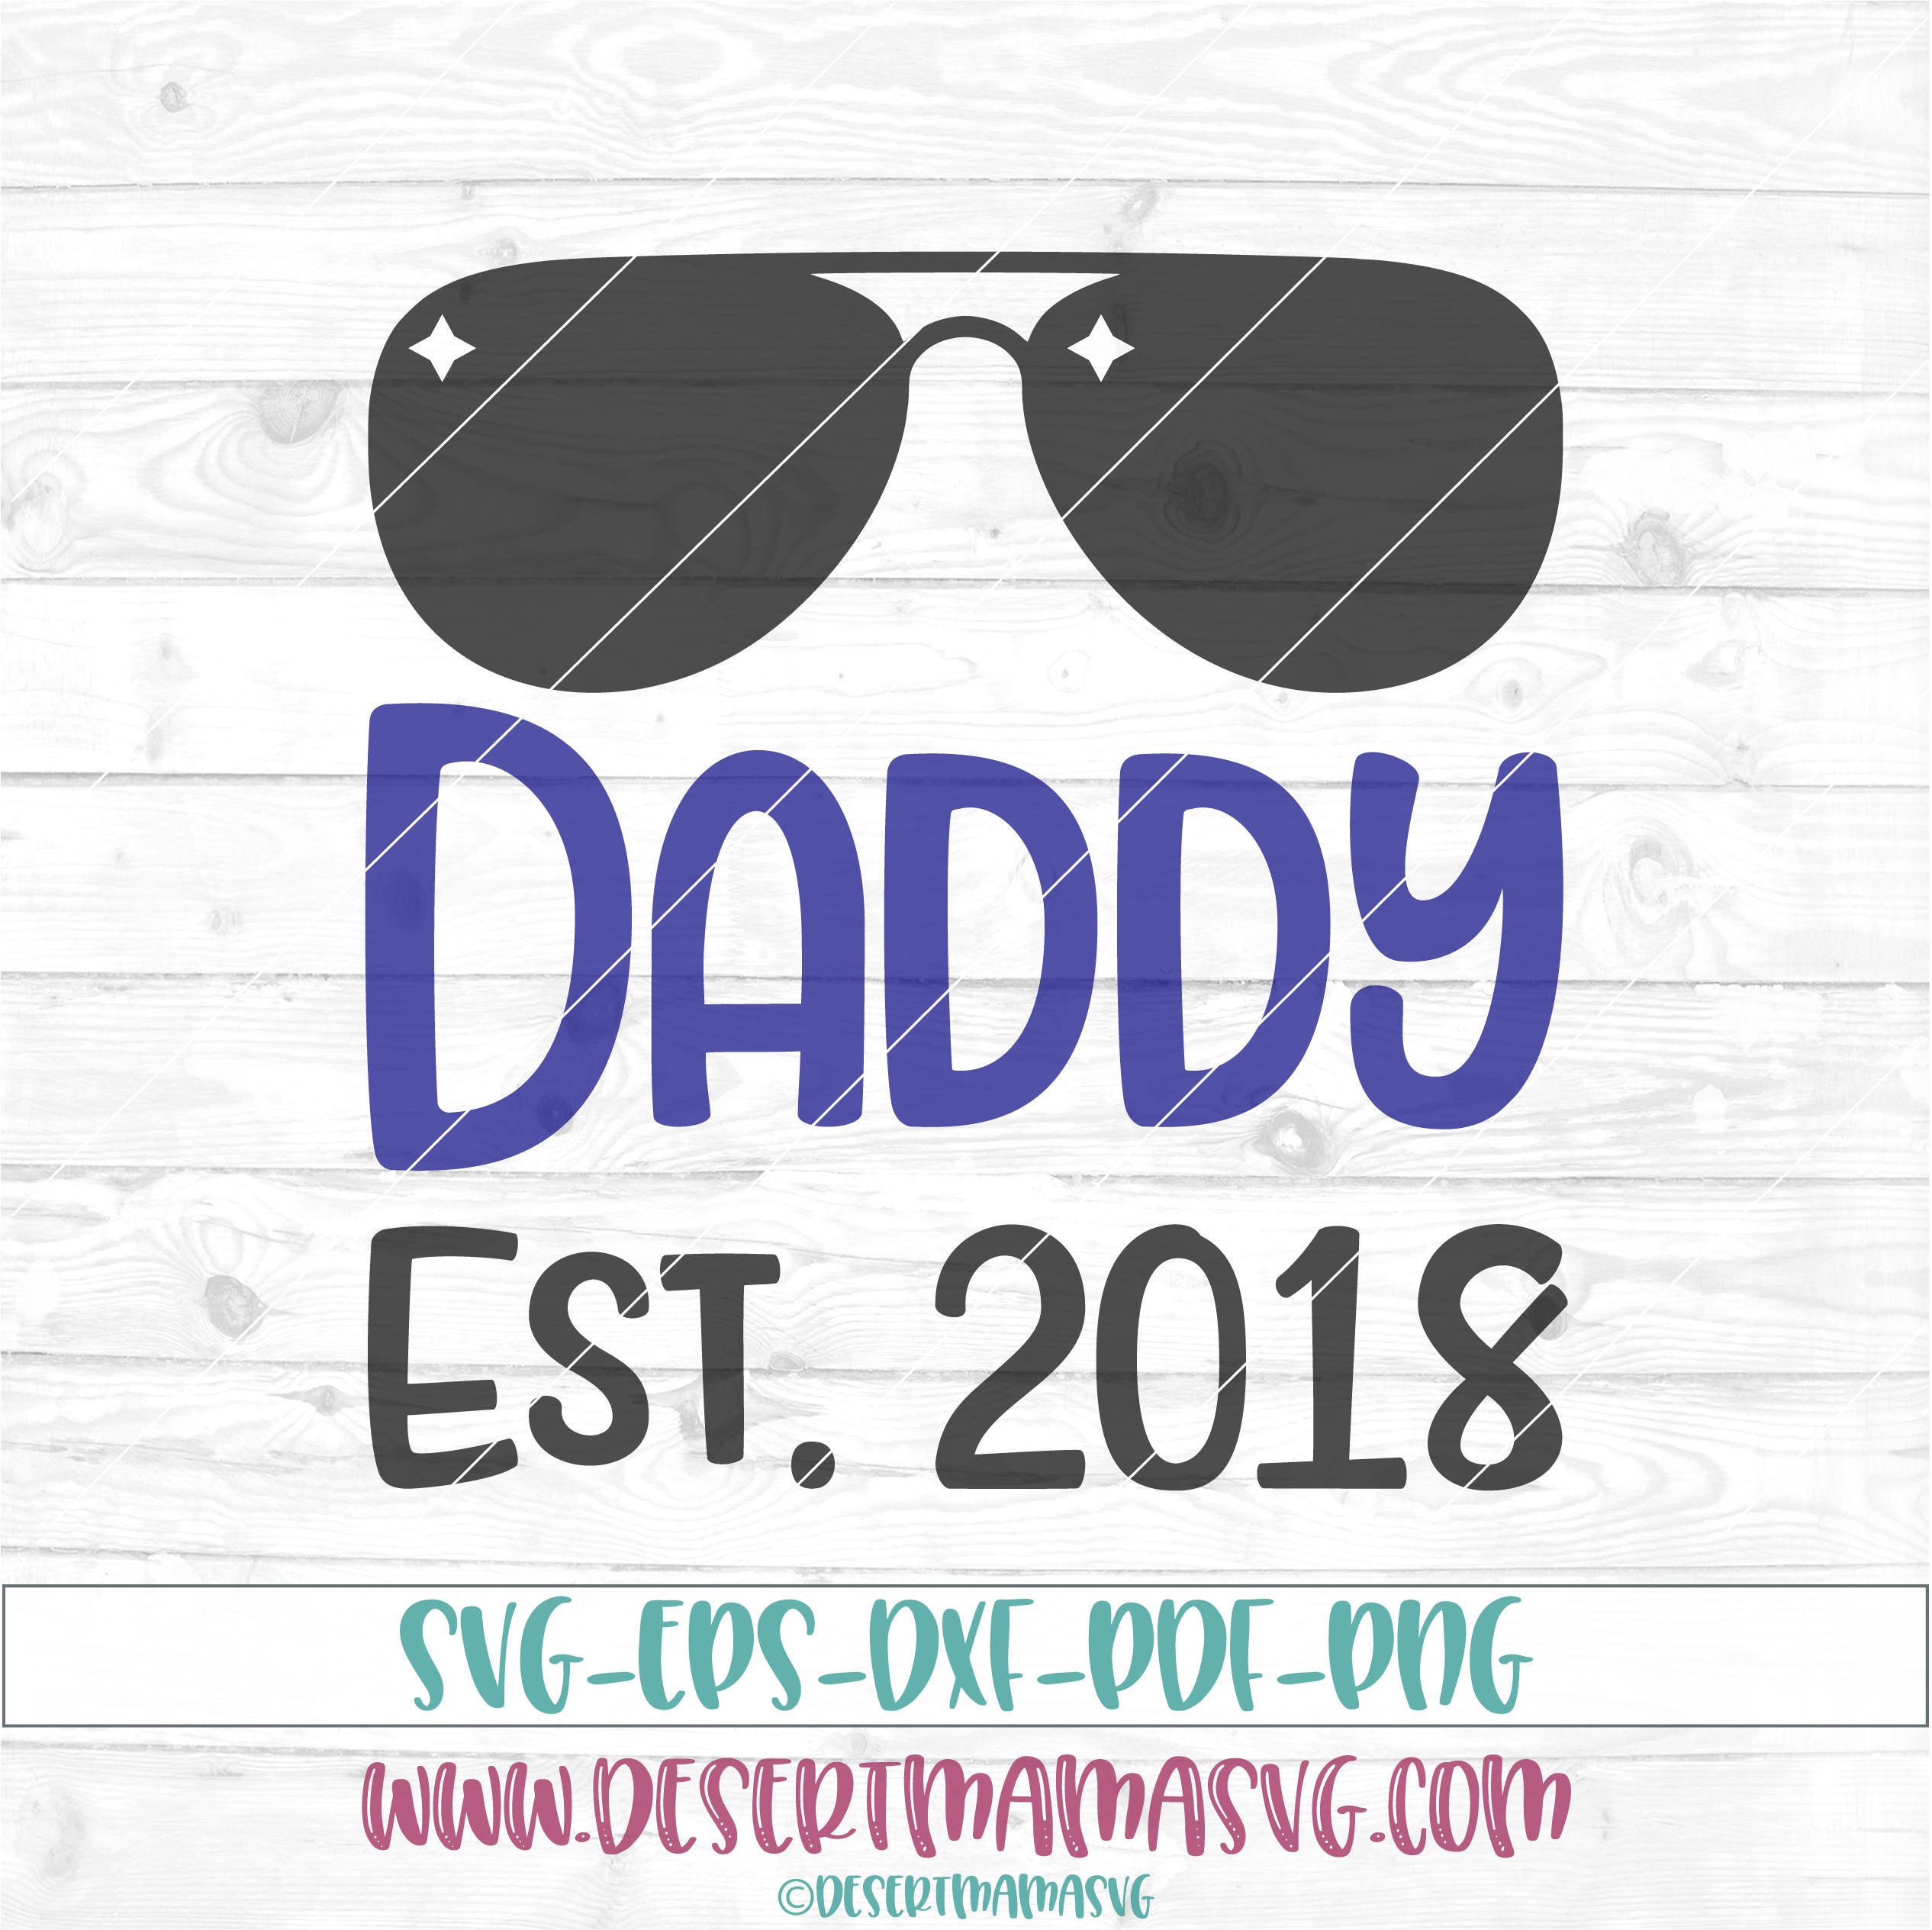 Download Daddy Est 2018 svg eps dxf png cricut cameo scan N cut